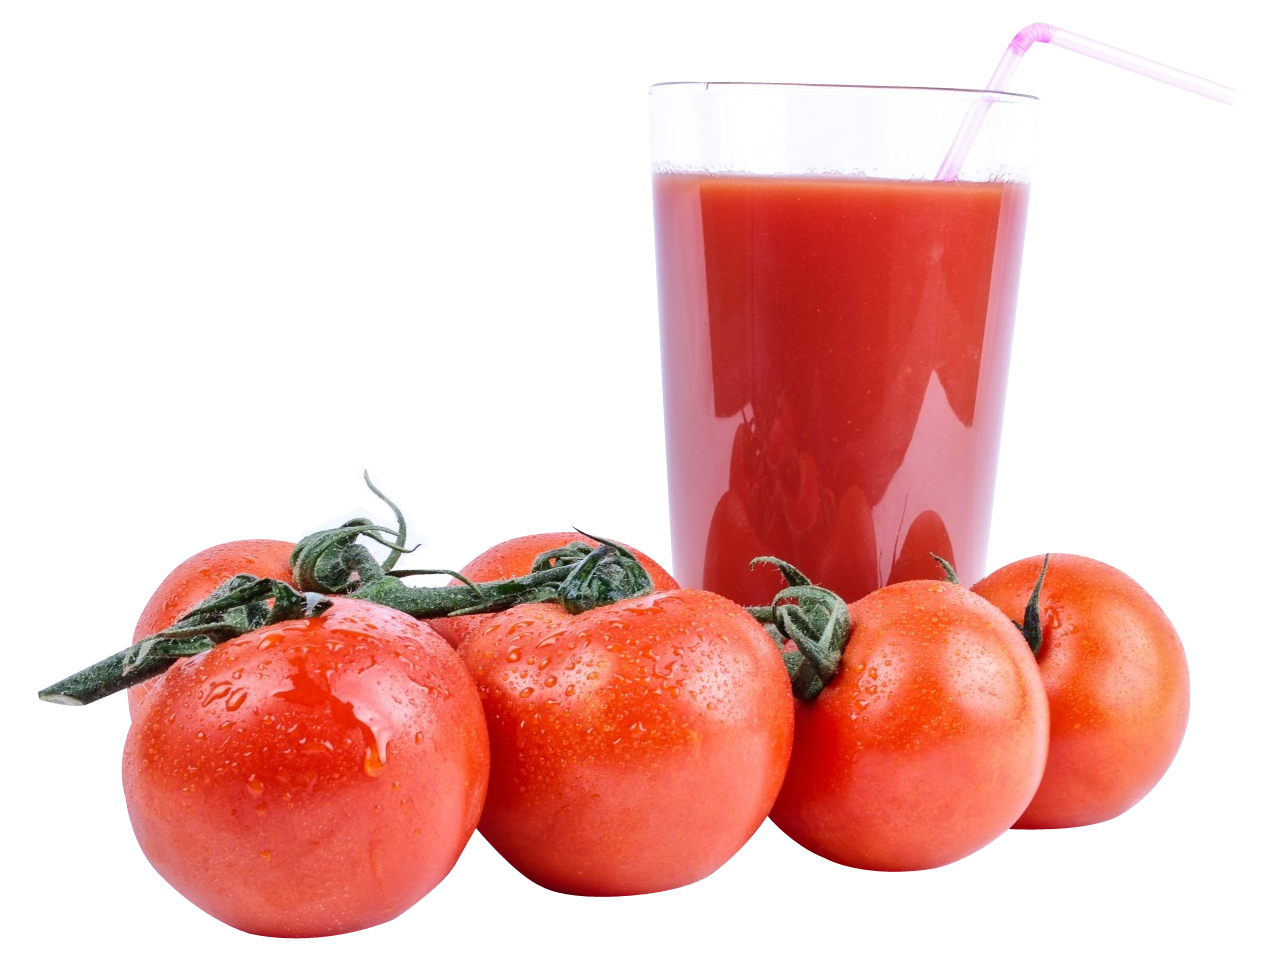 A Group Of Tomatoes Next To A Glass Of Juice